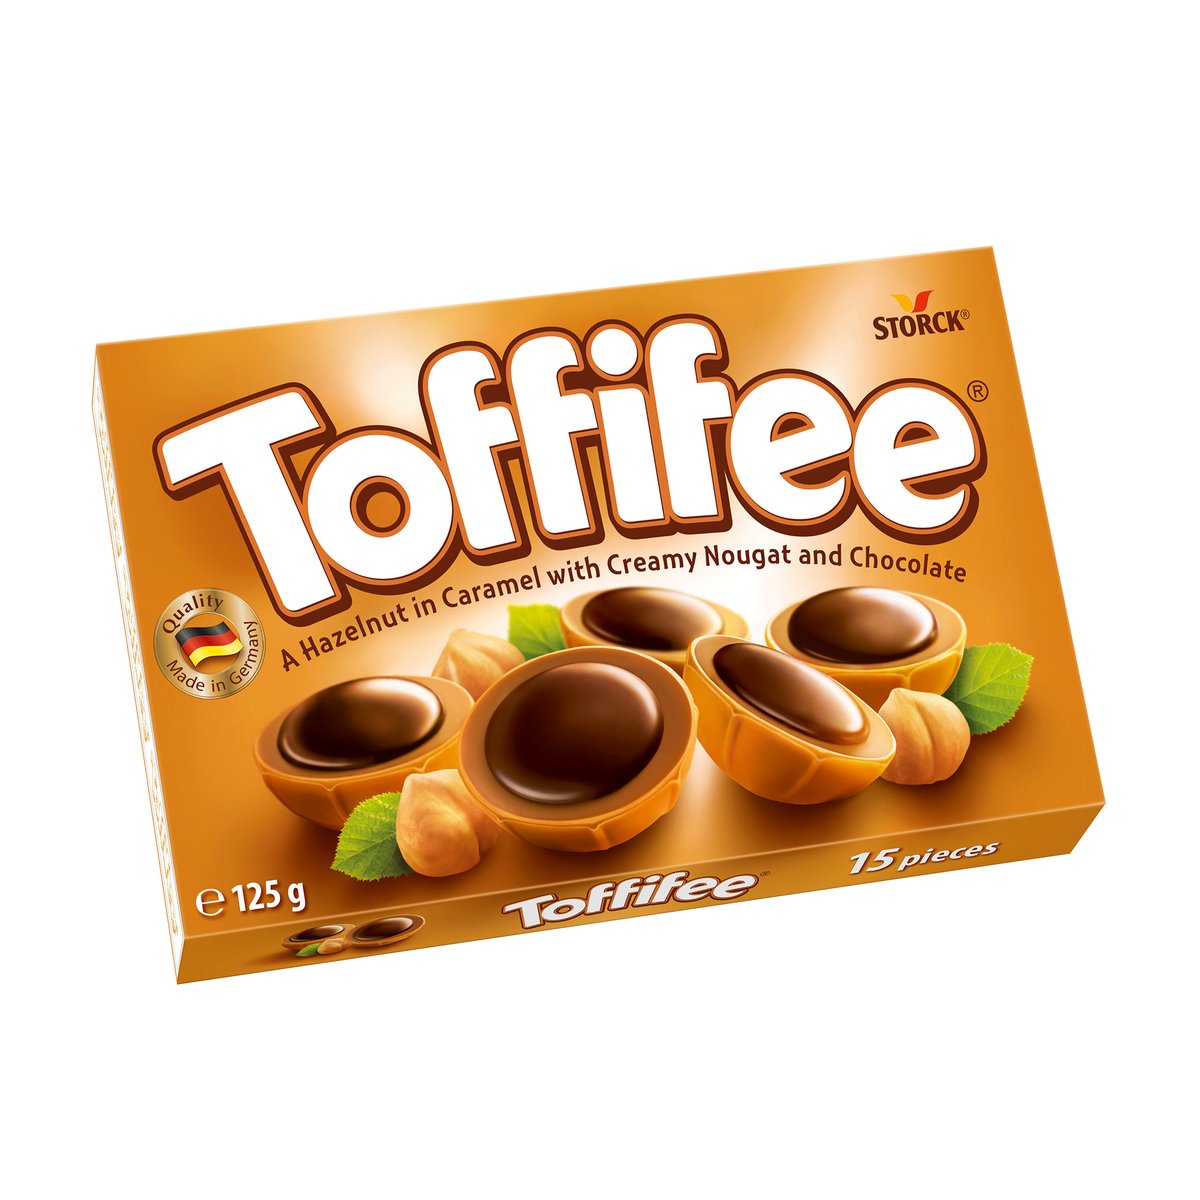 Storck Toffifee A Hazelnut In Caramel With Creamy Nougat And Chocolate 125 g